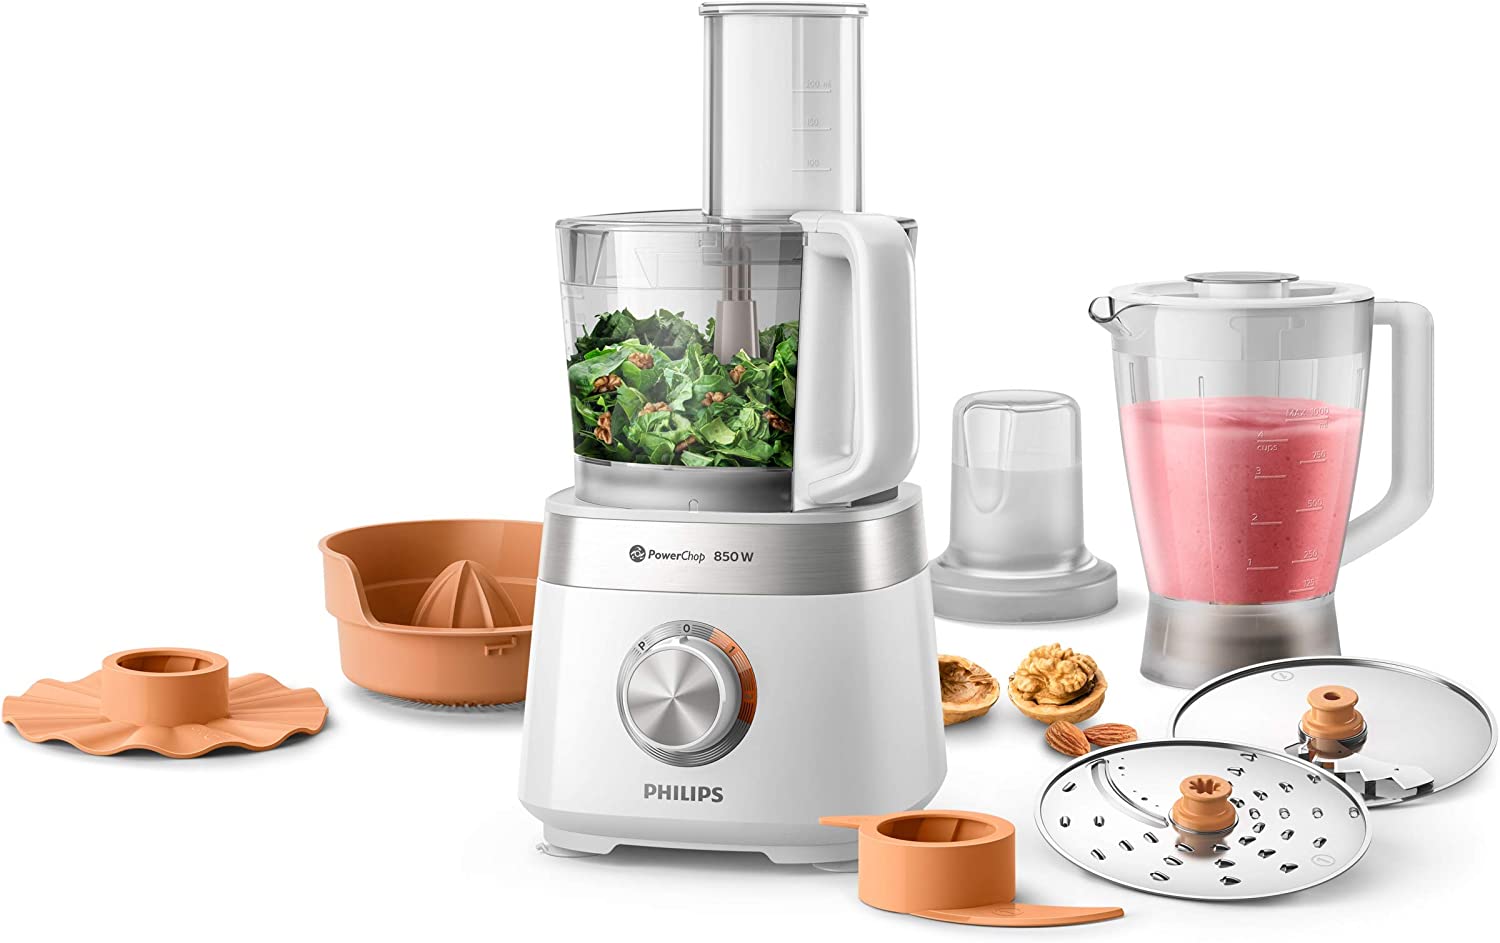 Philips Domestic Appliances Philips HR7530/00 Multifunctional Food Processor with Mixer, Chopper and Citrus Juicer, 850 W, 2.1 Litres, Stainless Steel